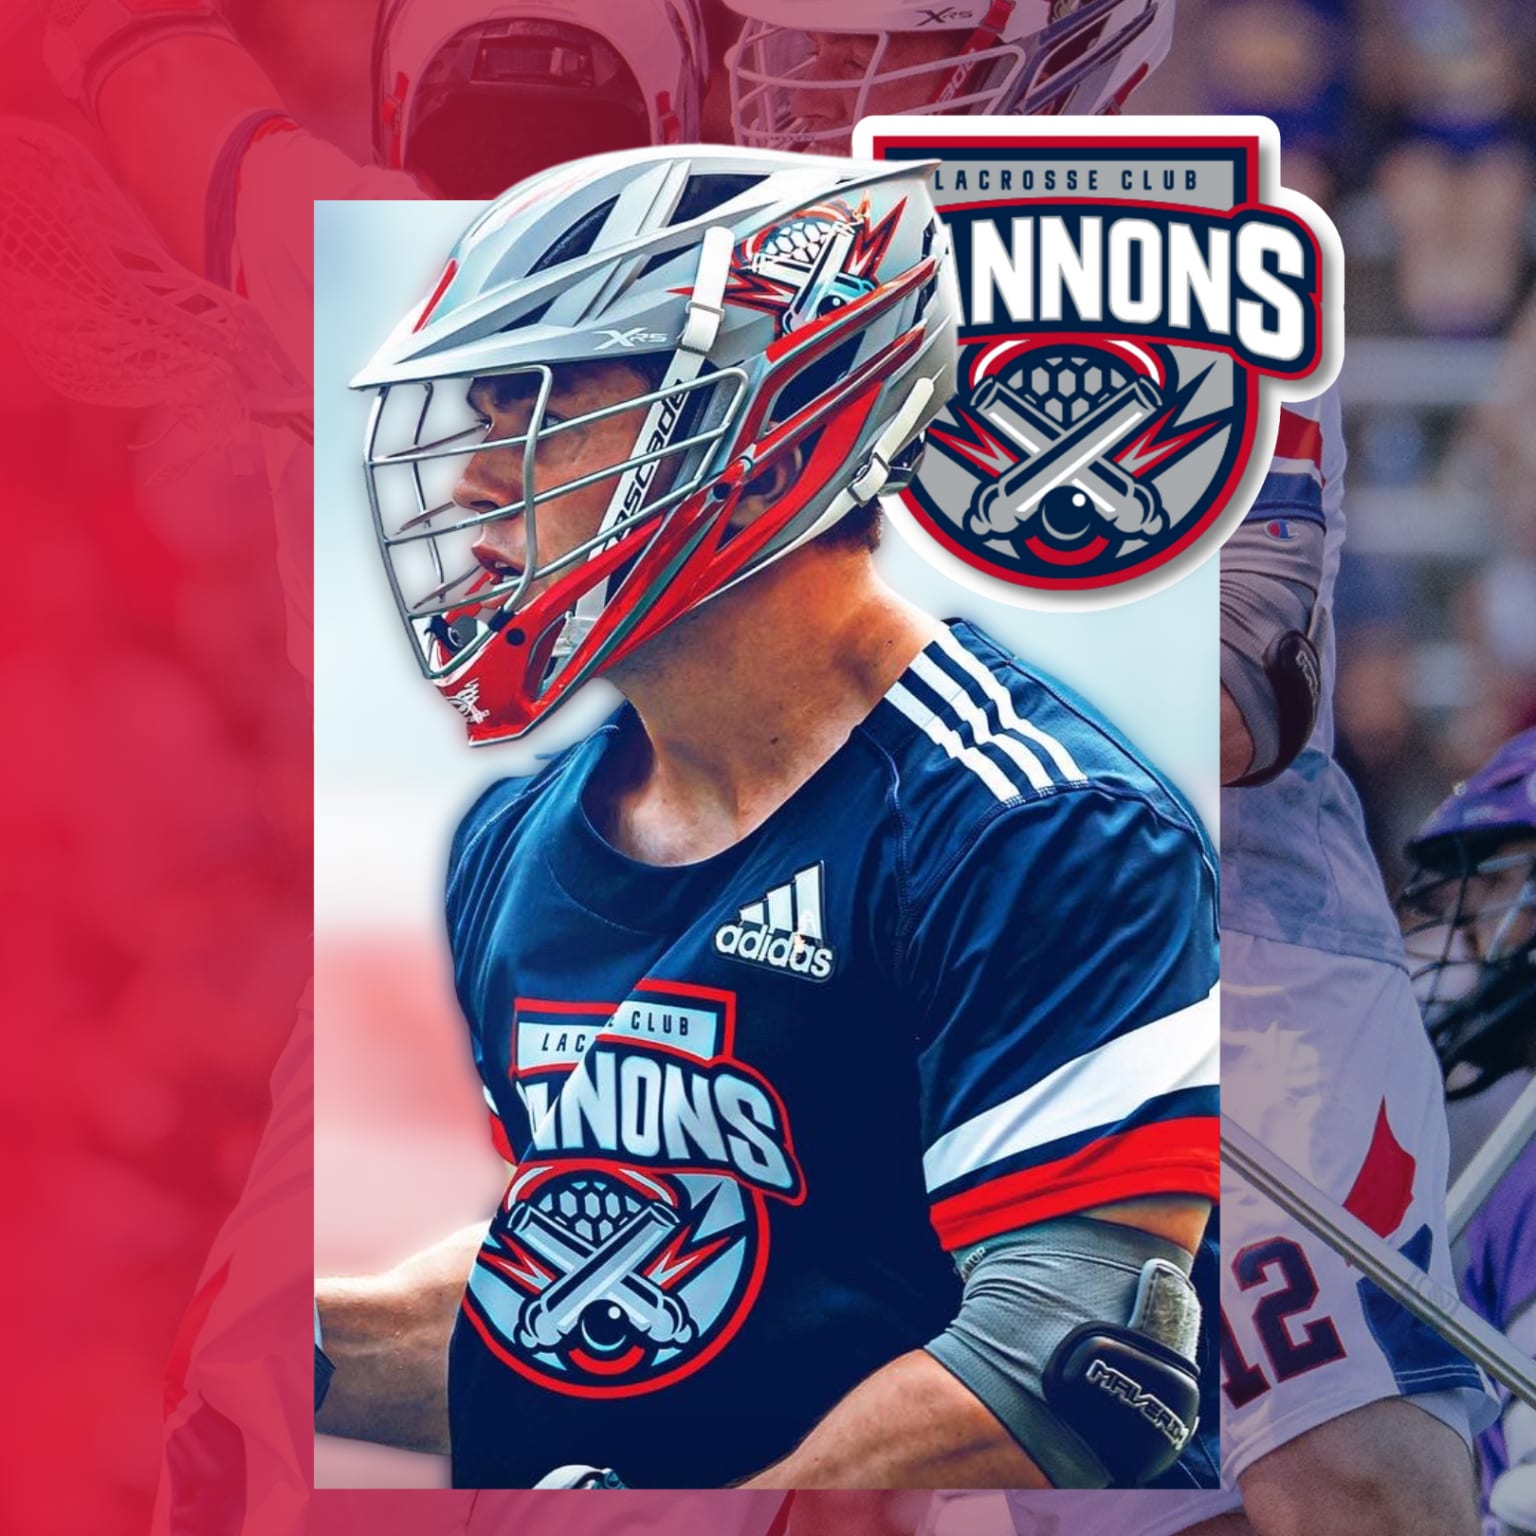 2013 MLL All-Pro Team presented by LACROSSE.COM announced